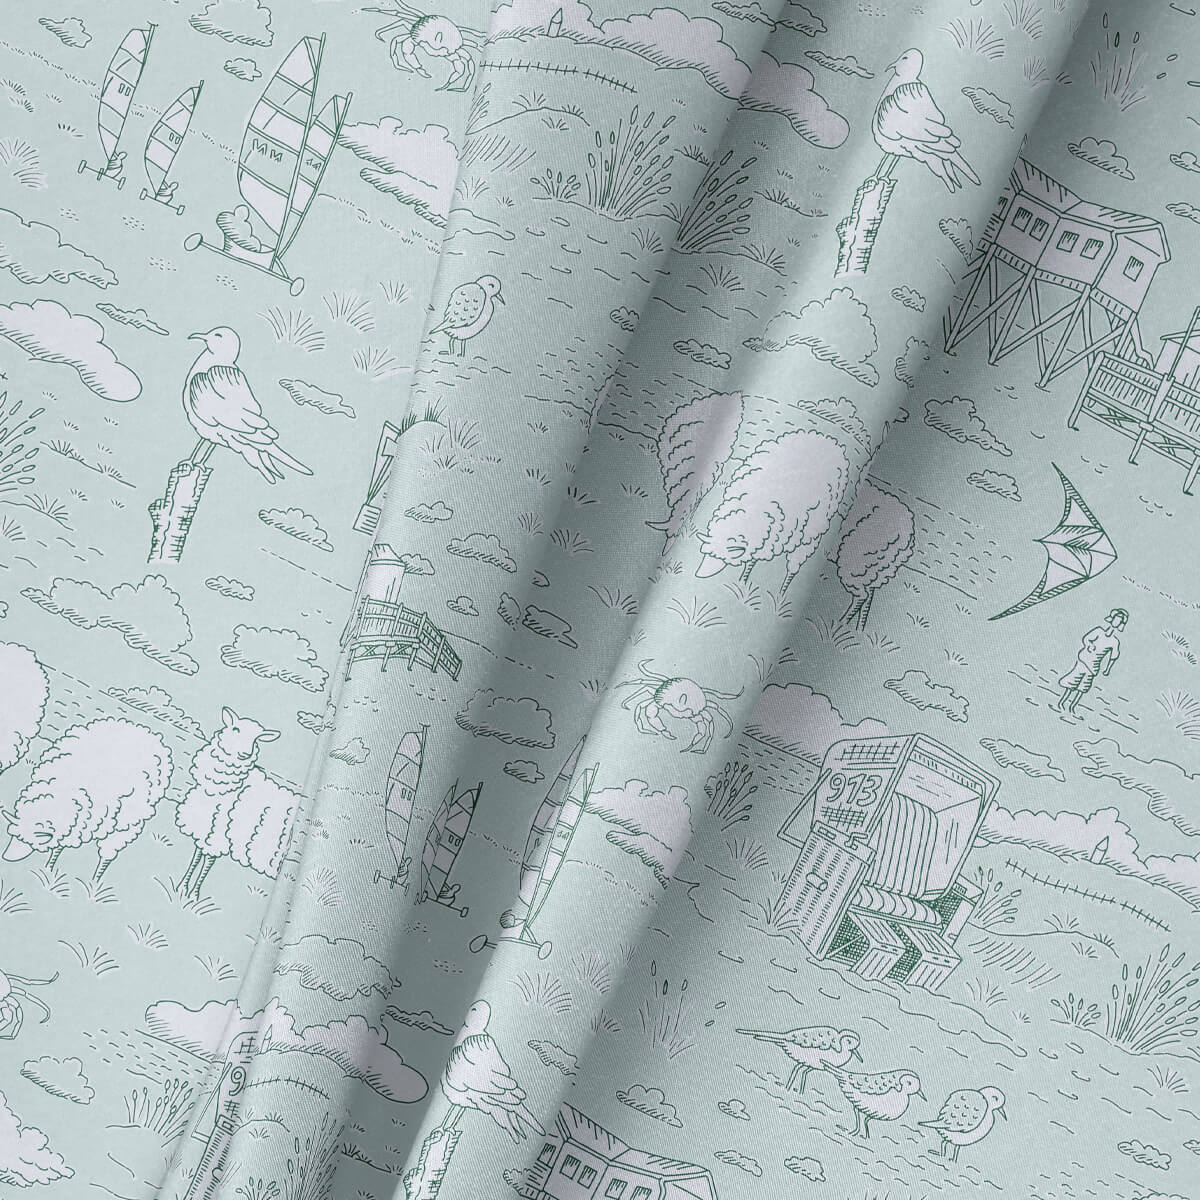 fabric mockup with Toile de Jouy pattern